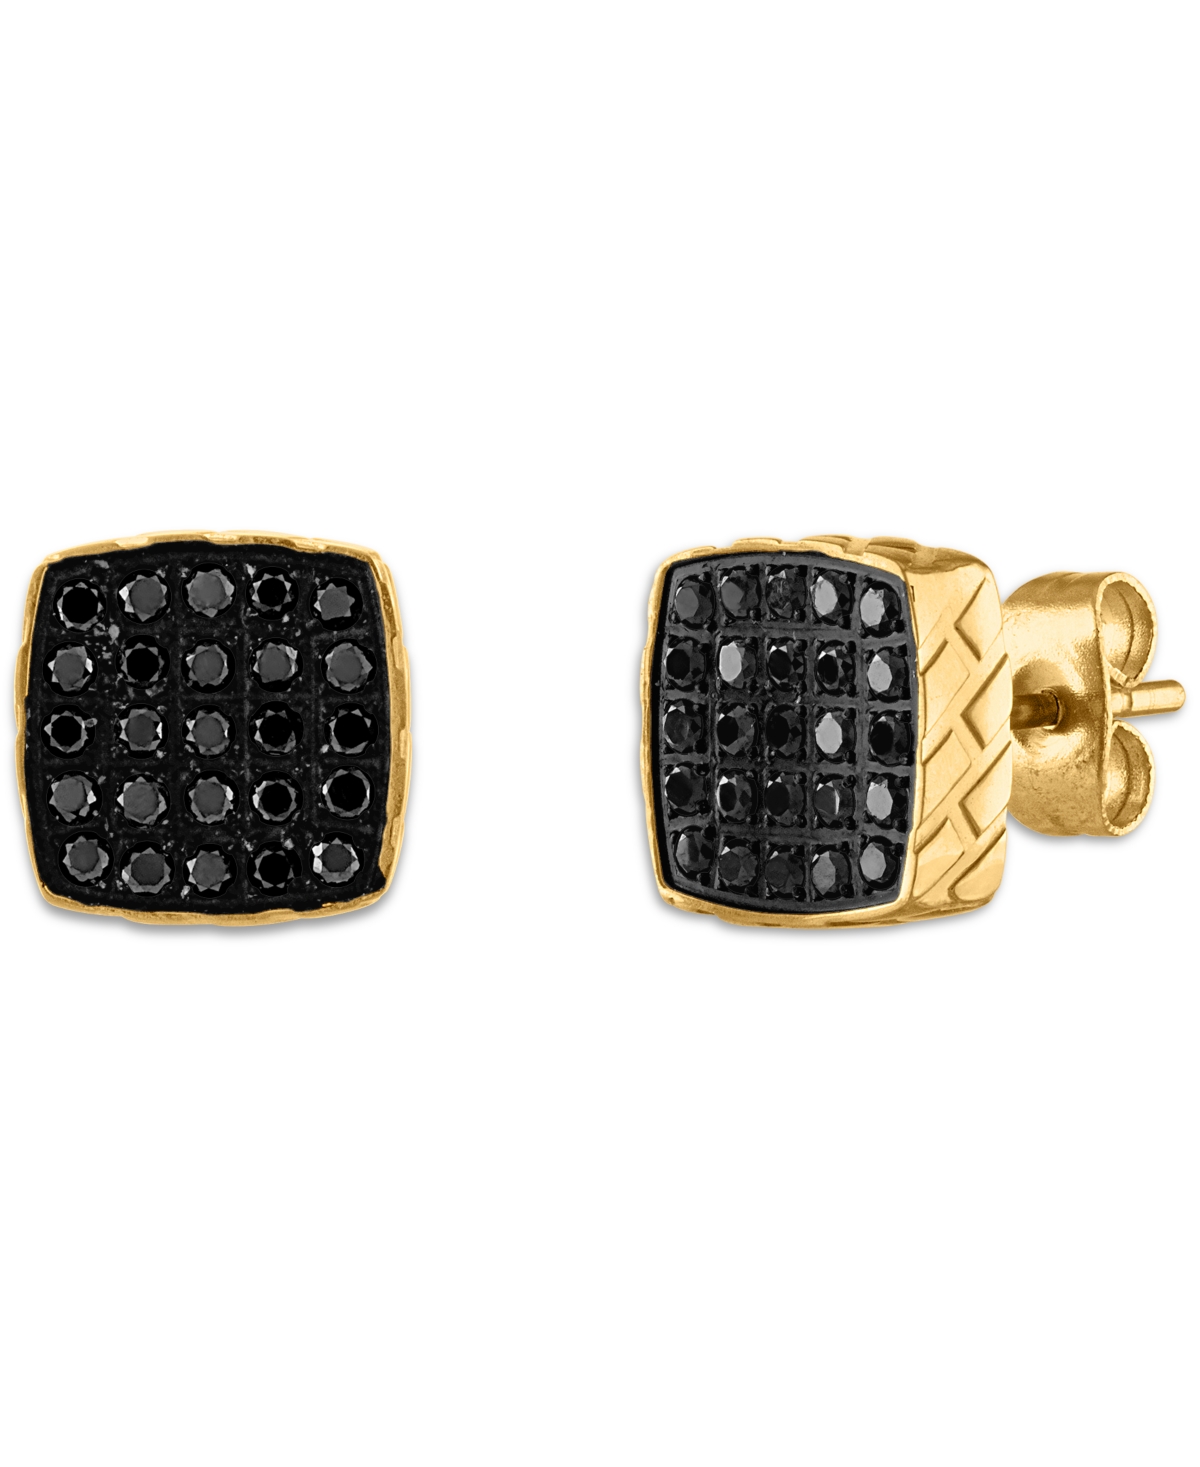 Esquire Men's Jewelry Black Diamond Earrings (1/4 ct. t.w.) in Stainless Steel, Created for Macy's (Also in Gold-Tone)